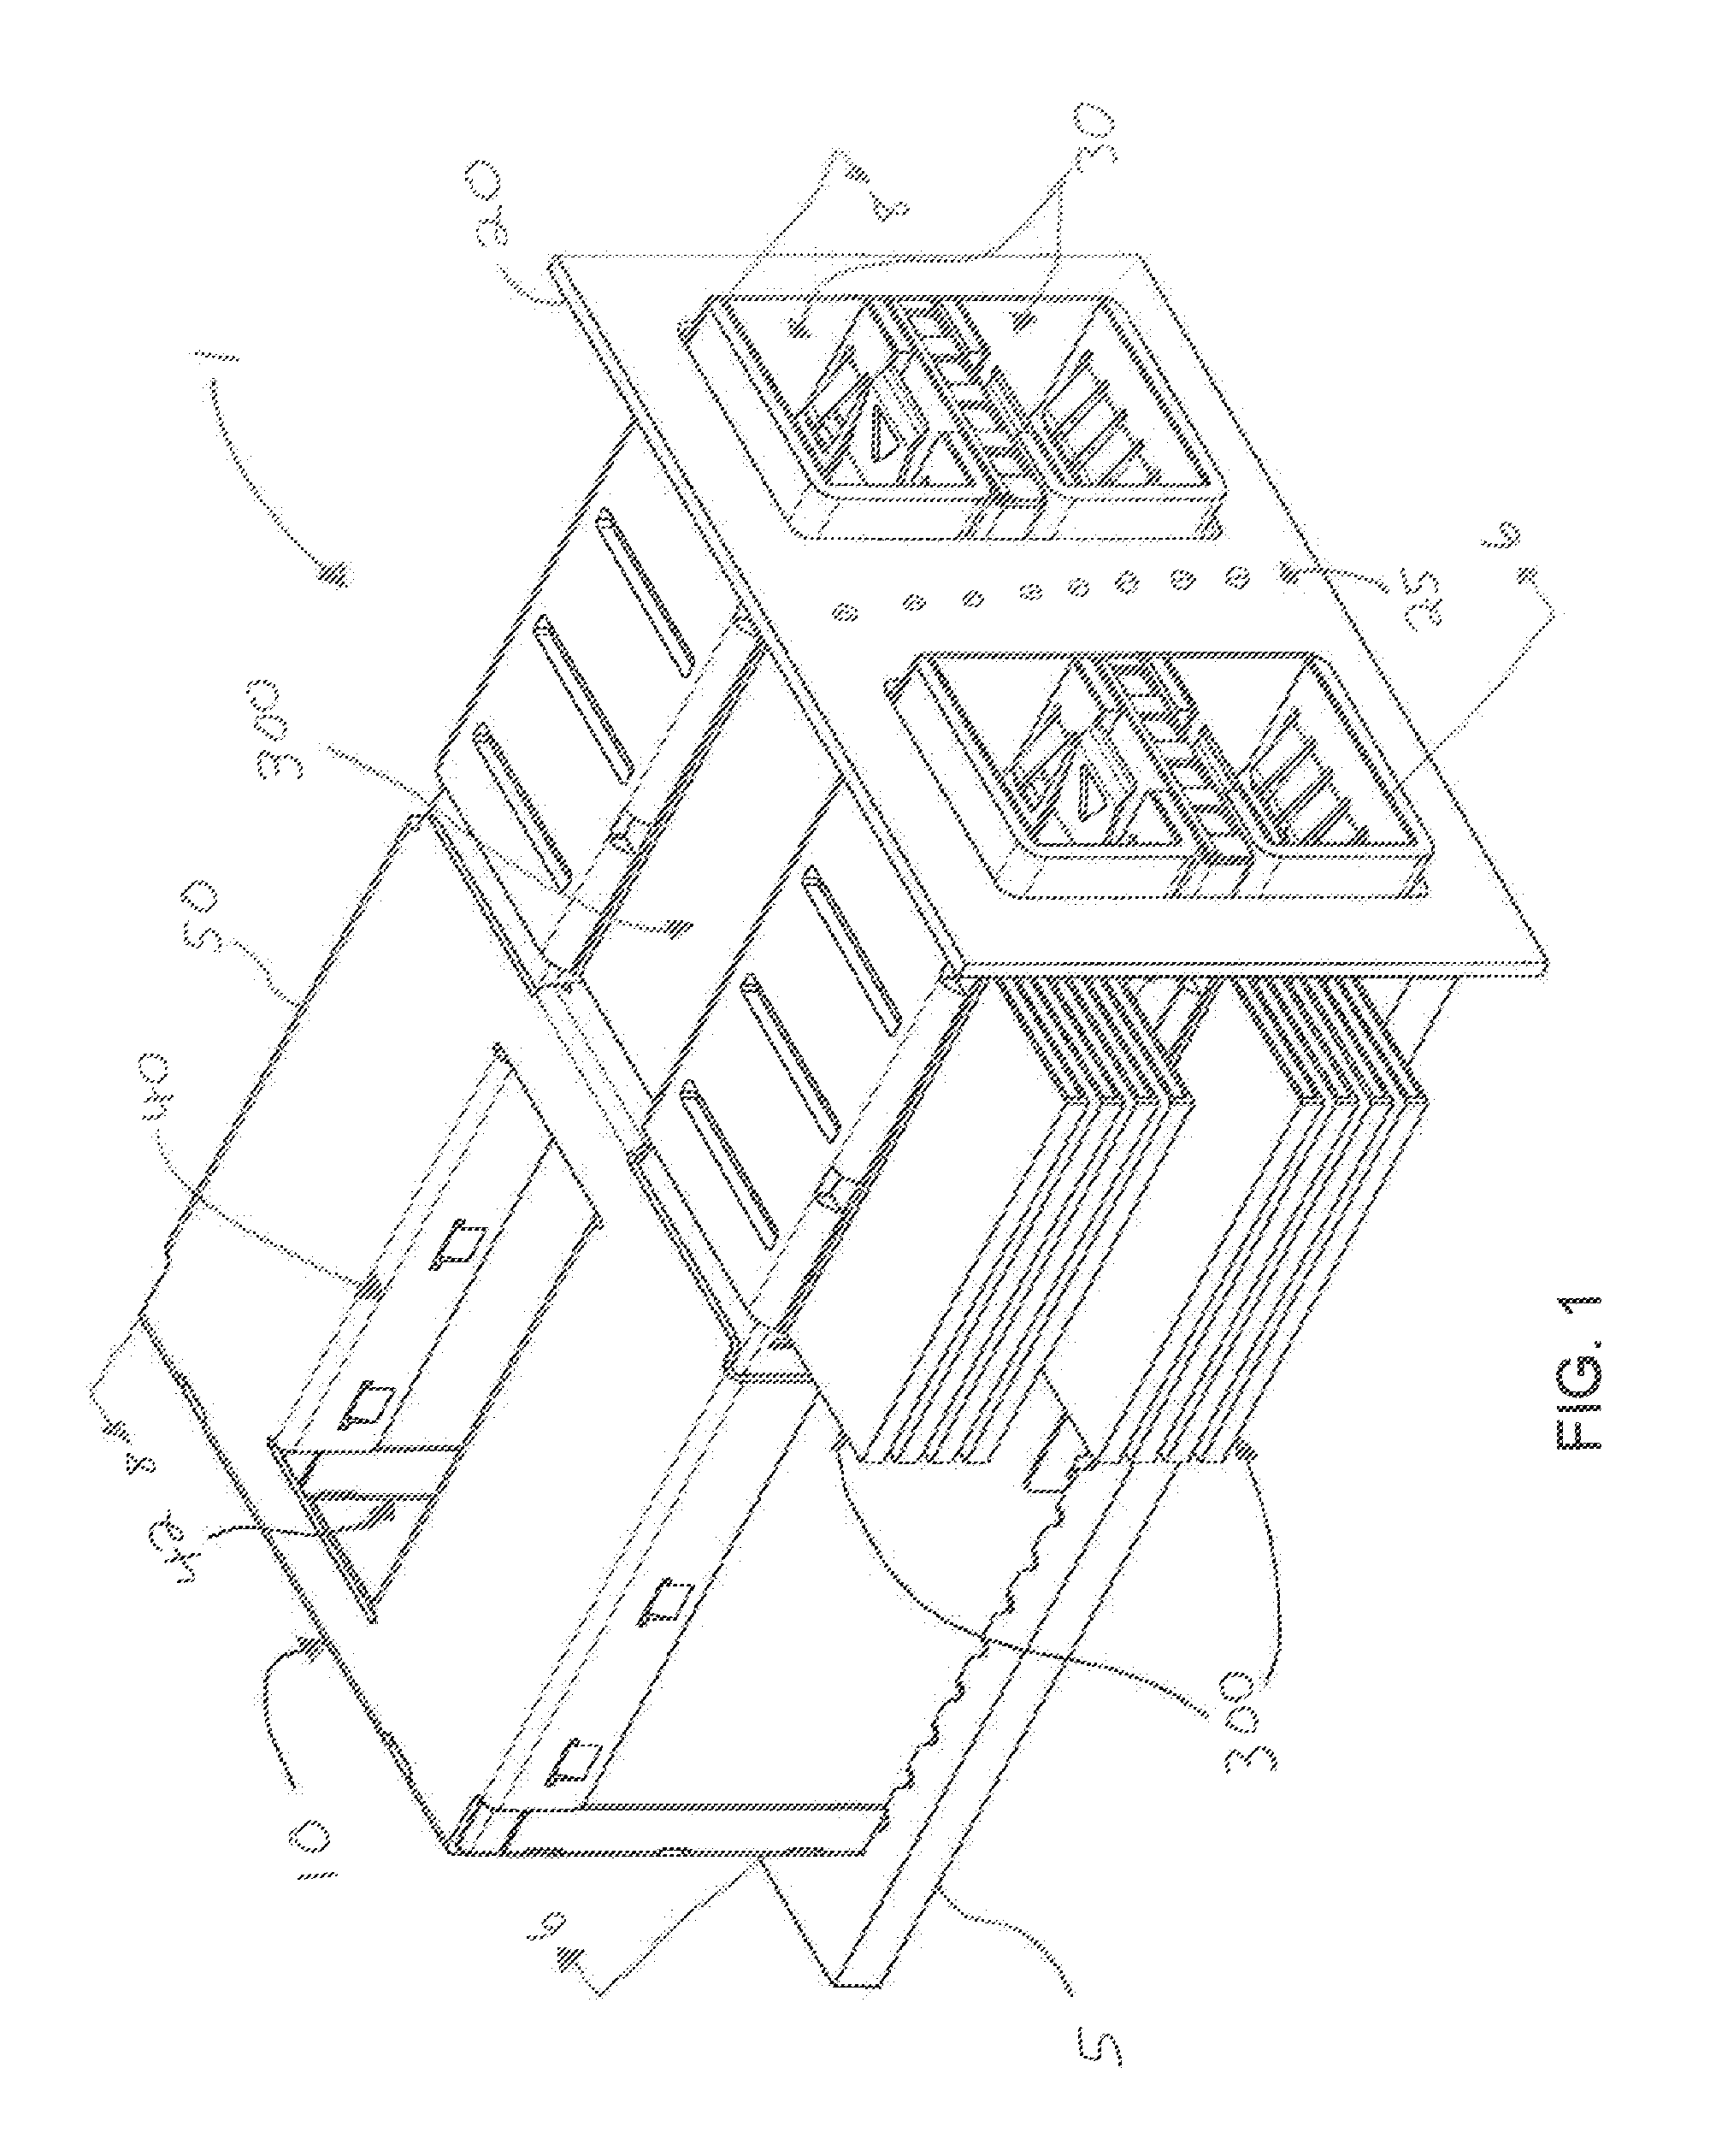 Connector with integrated heat sink